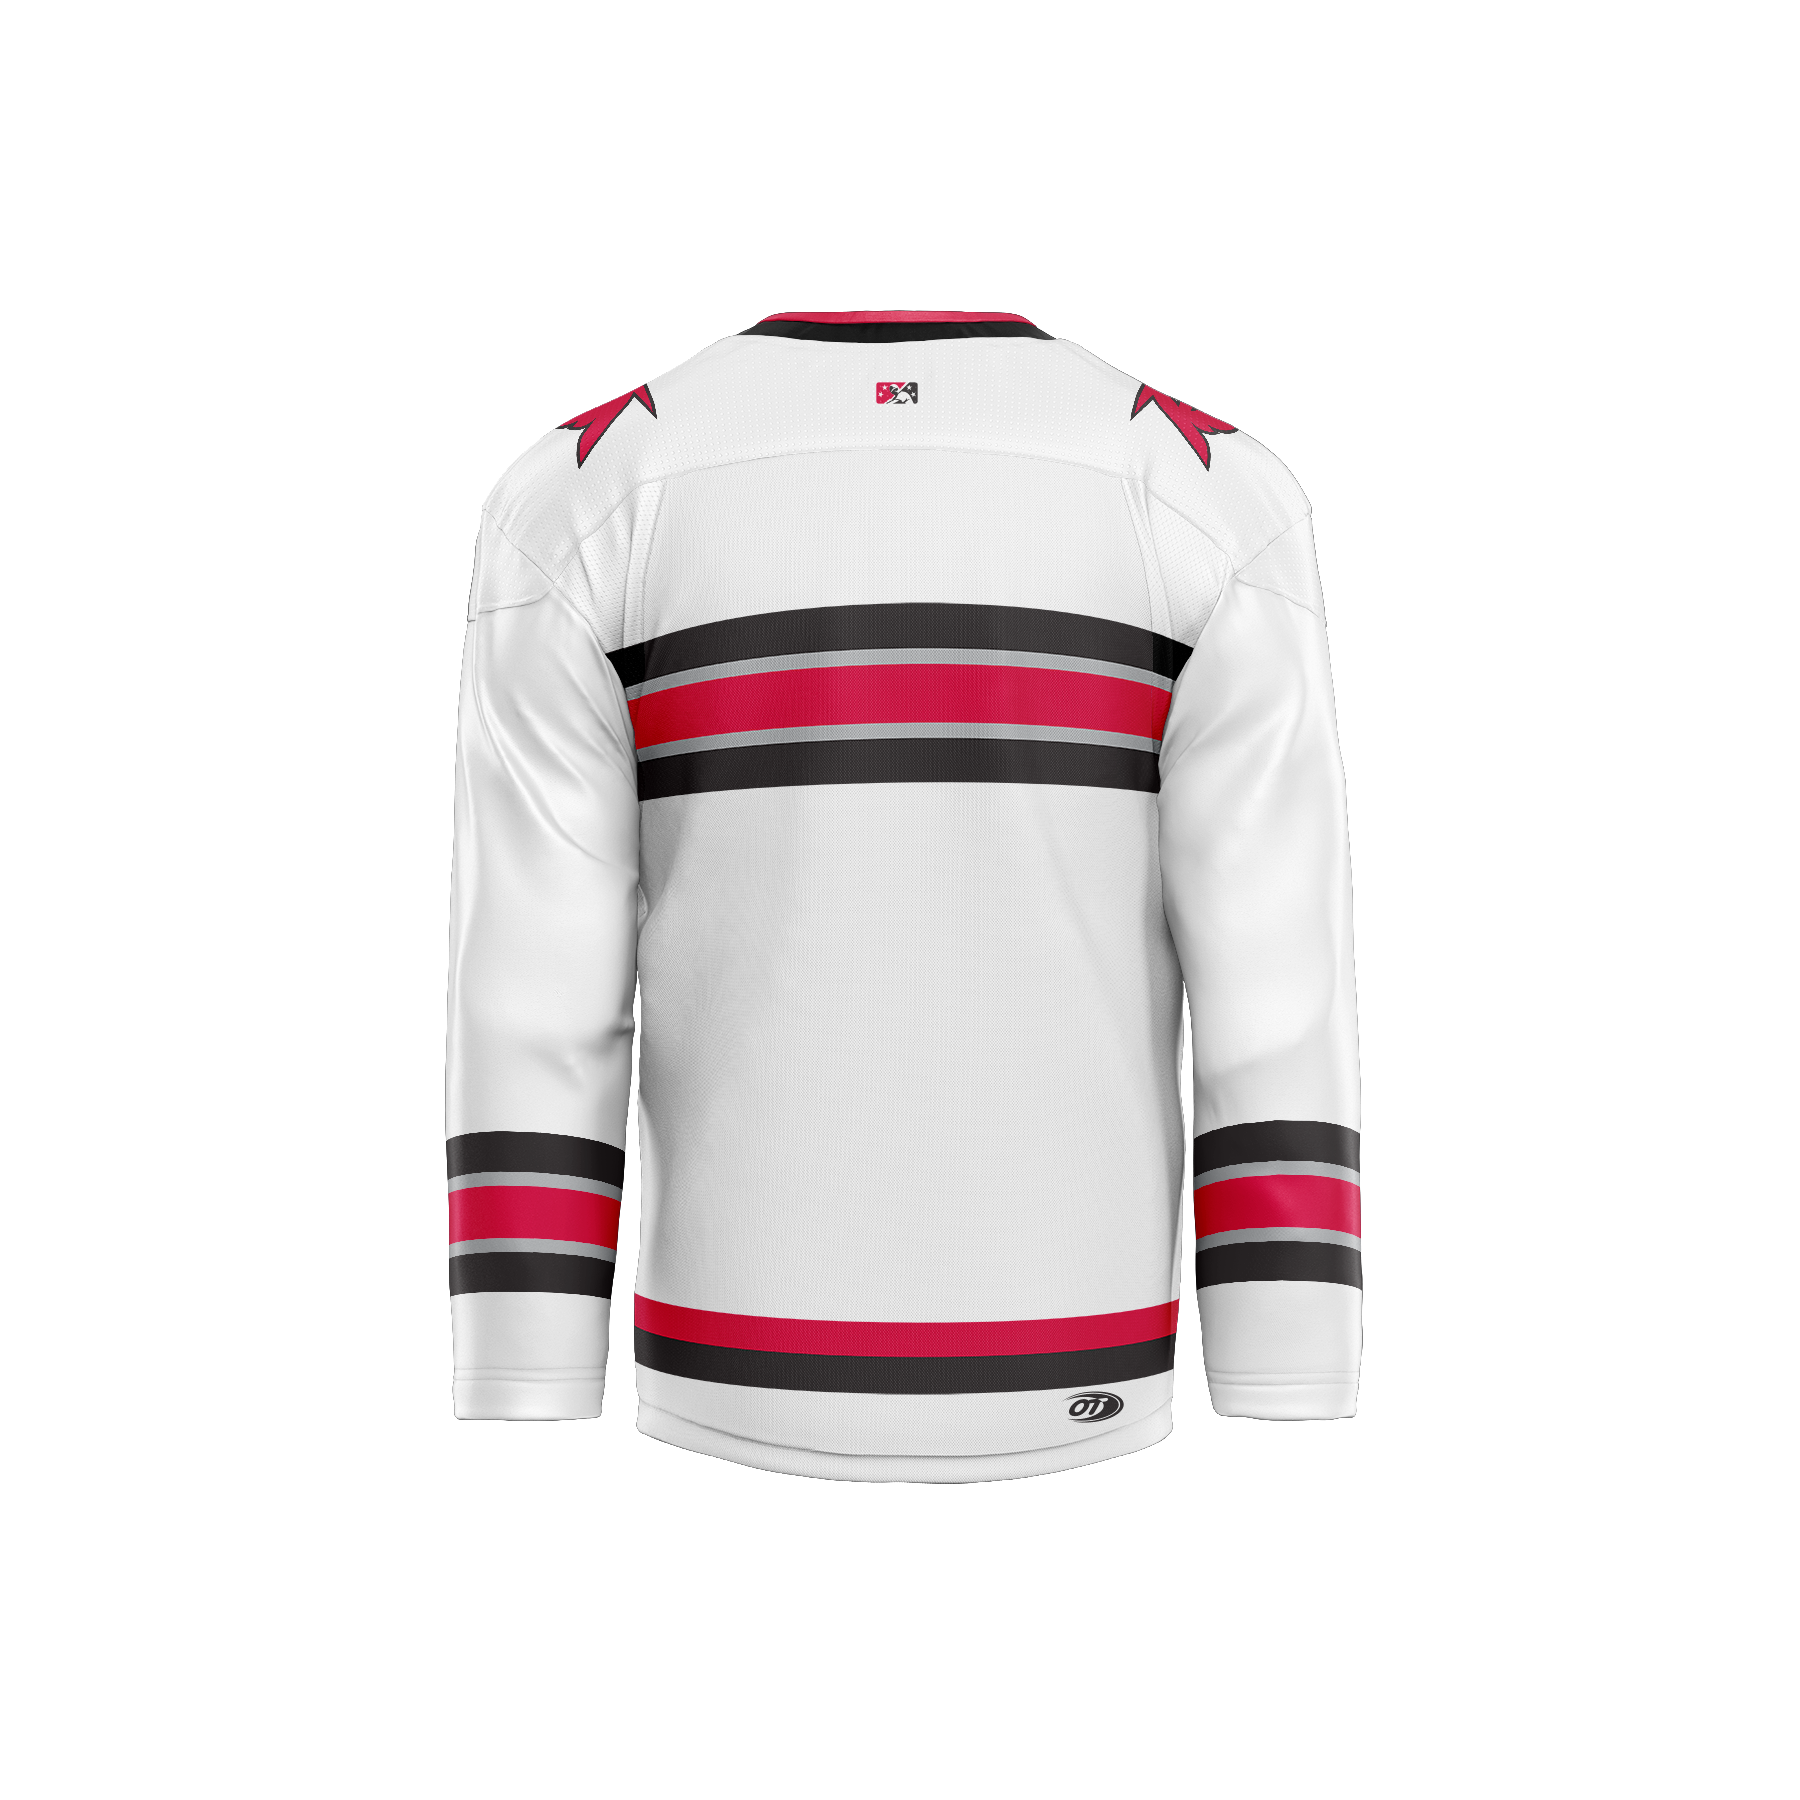 Hockey Jersey png images